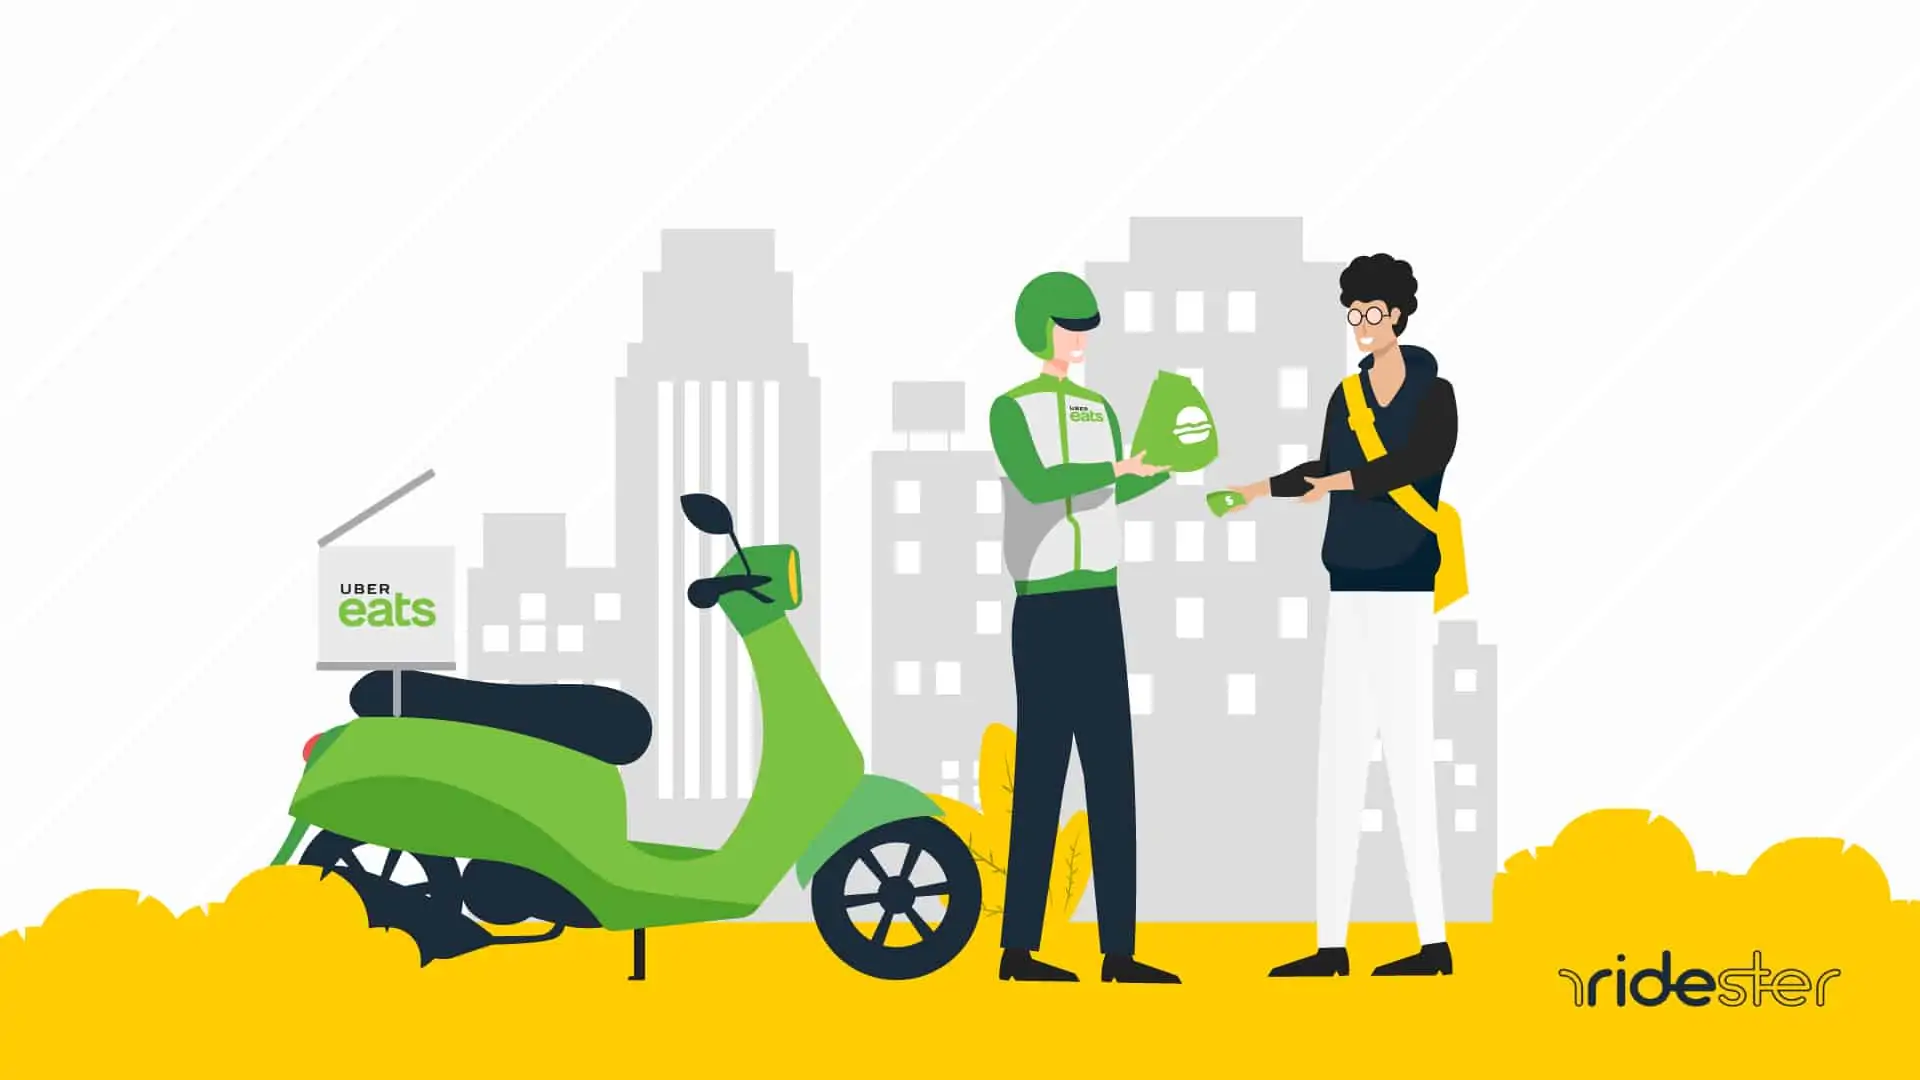 vector graphic of a man handing cash to delivery person for uber eats tipping suggestion